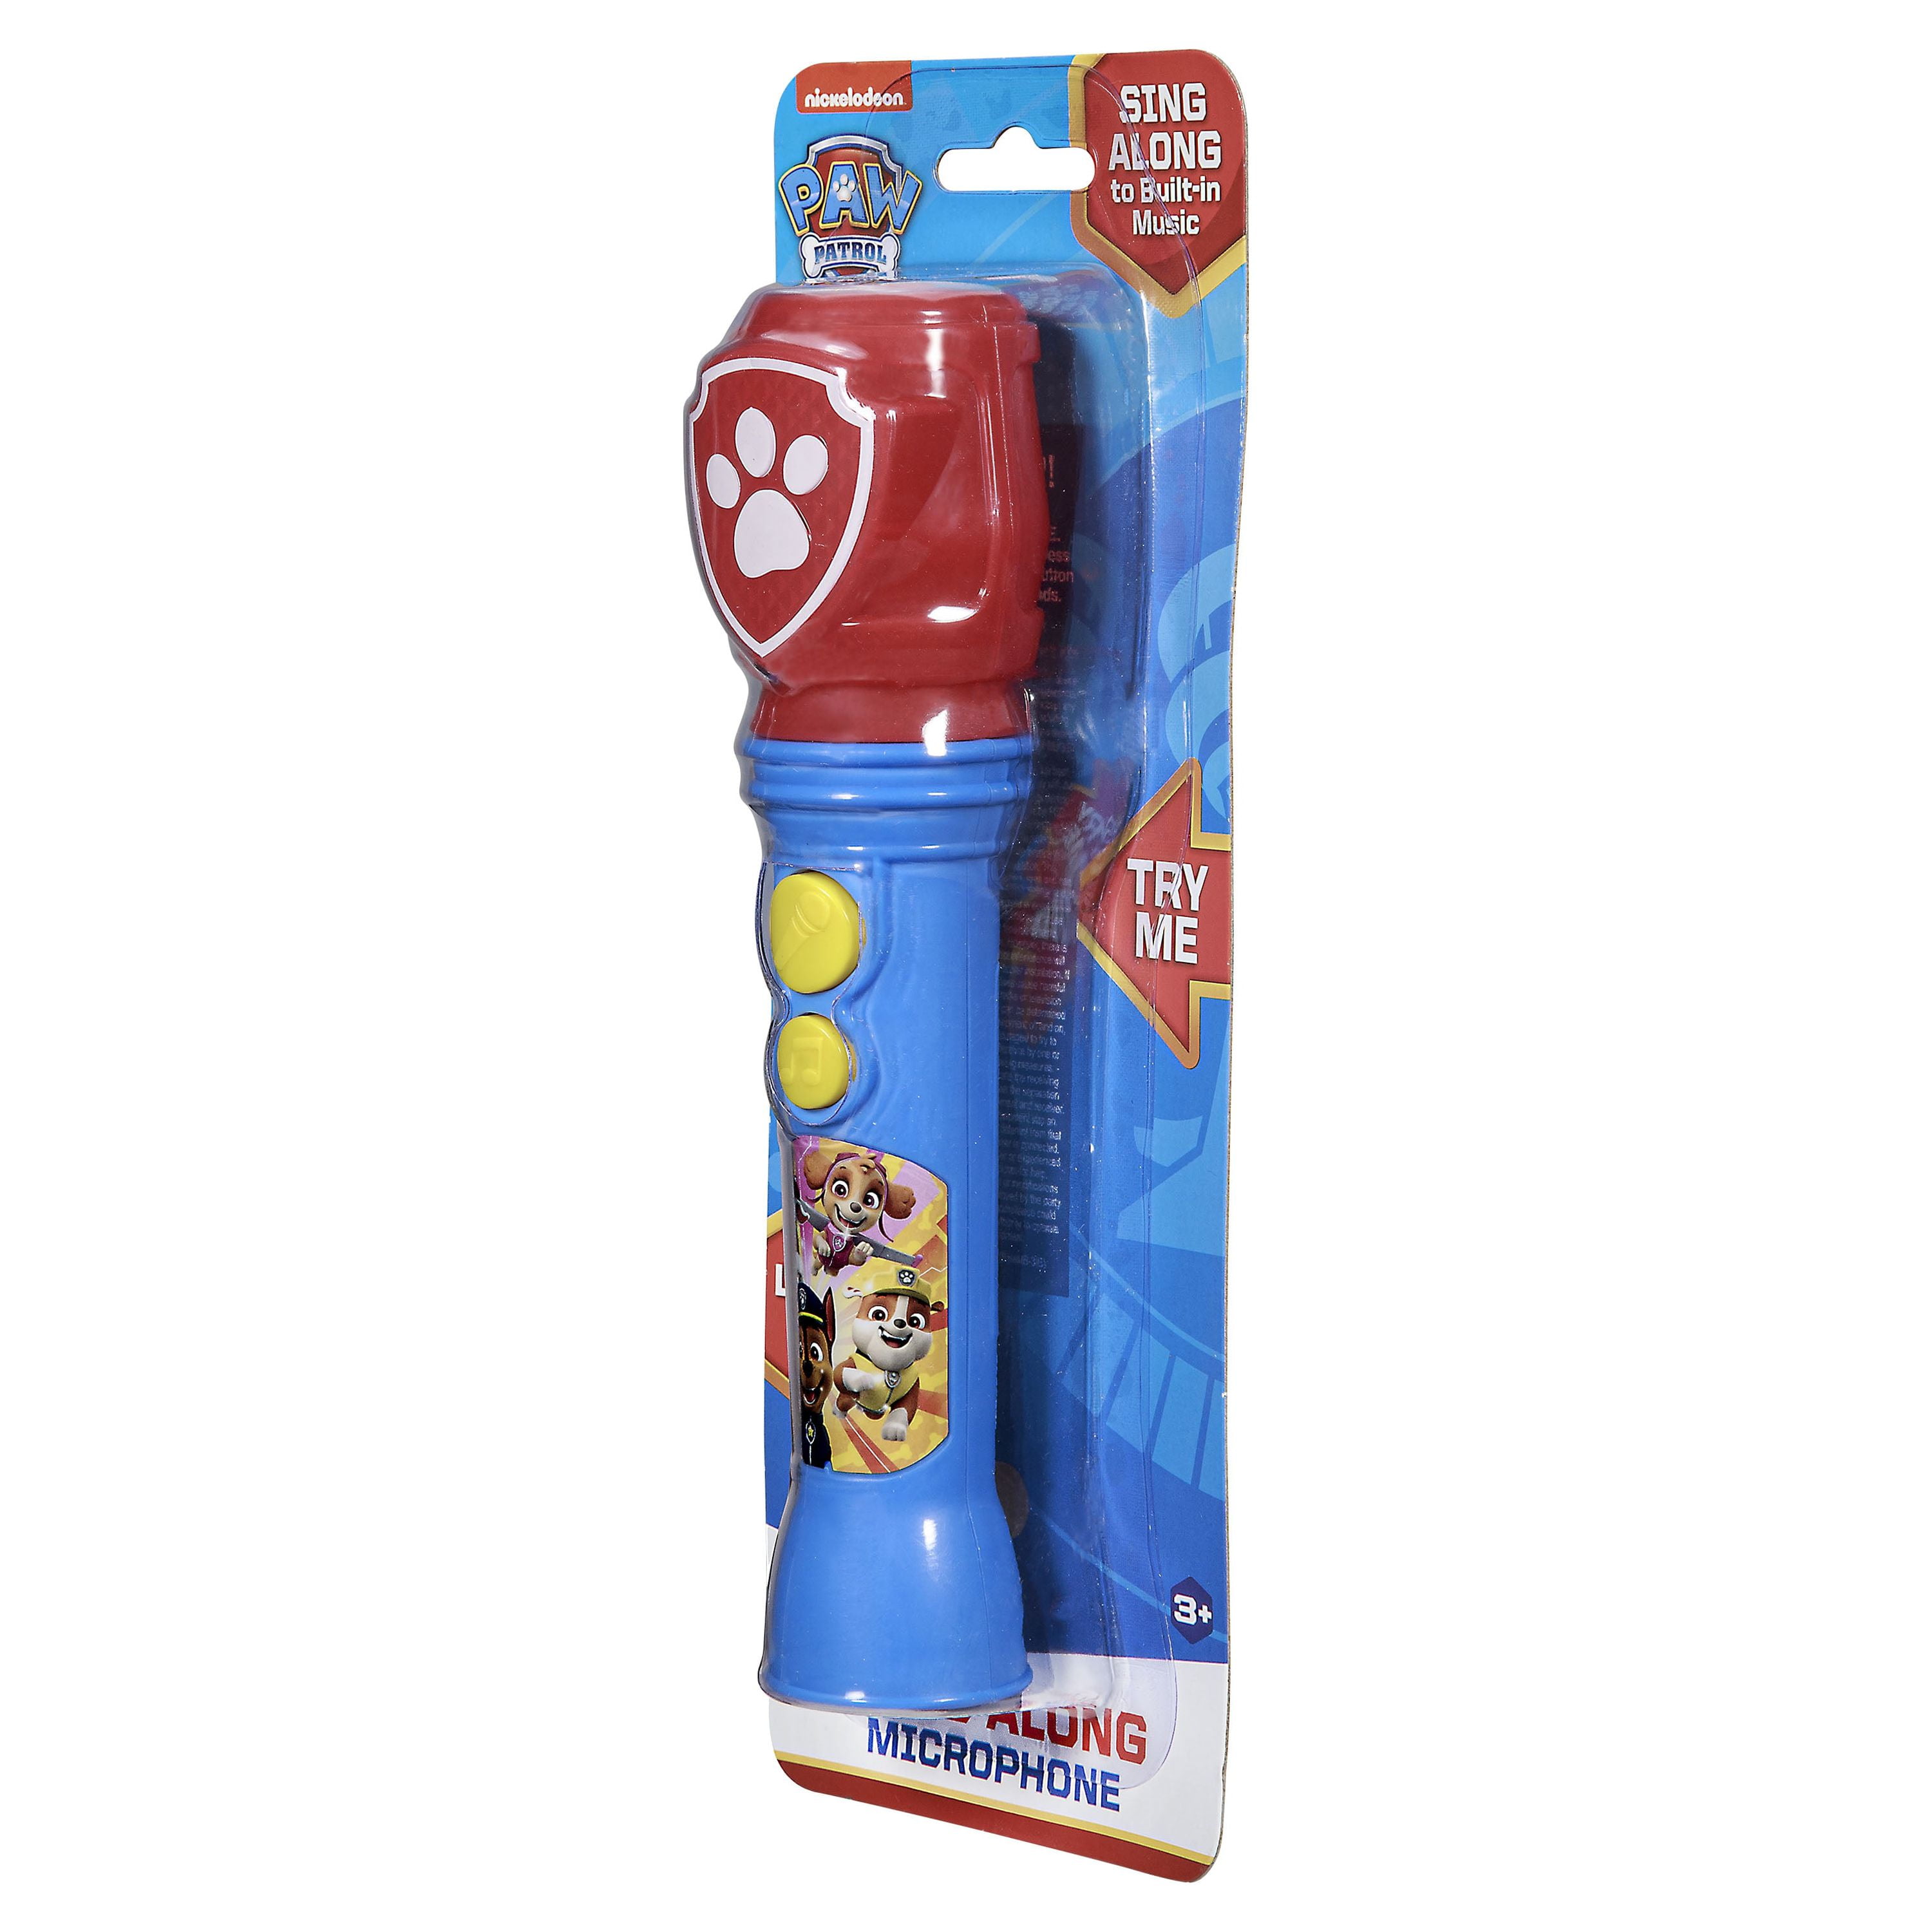 Paw Patrol Sing Along Light Up Microphone for Kids Ages 3 Years and Up. 